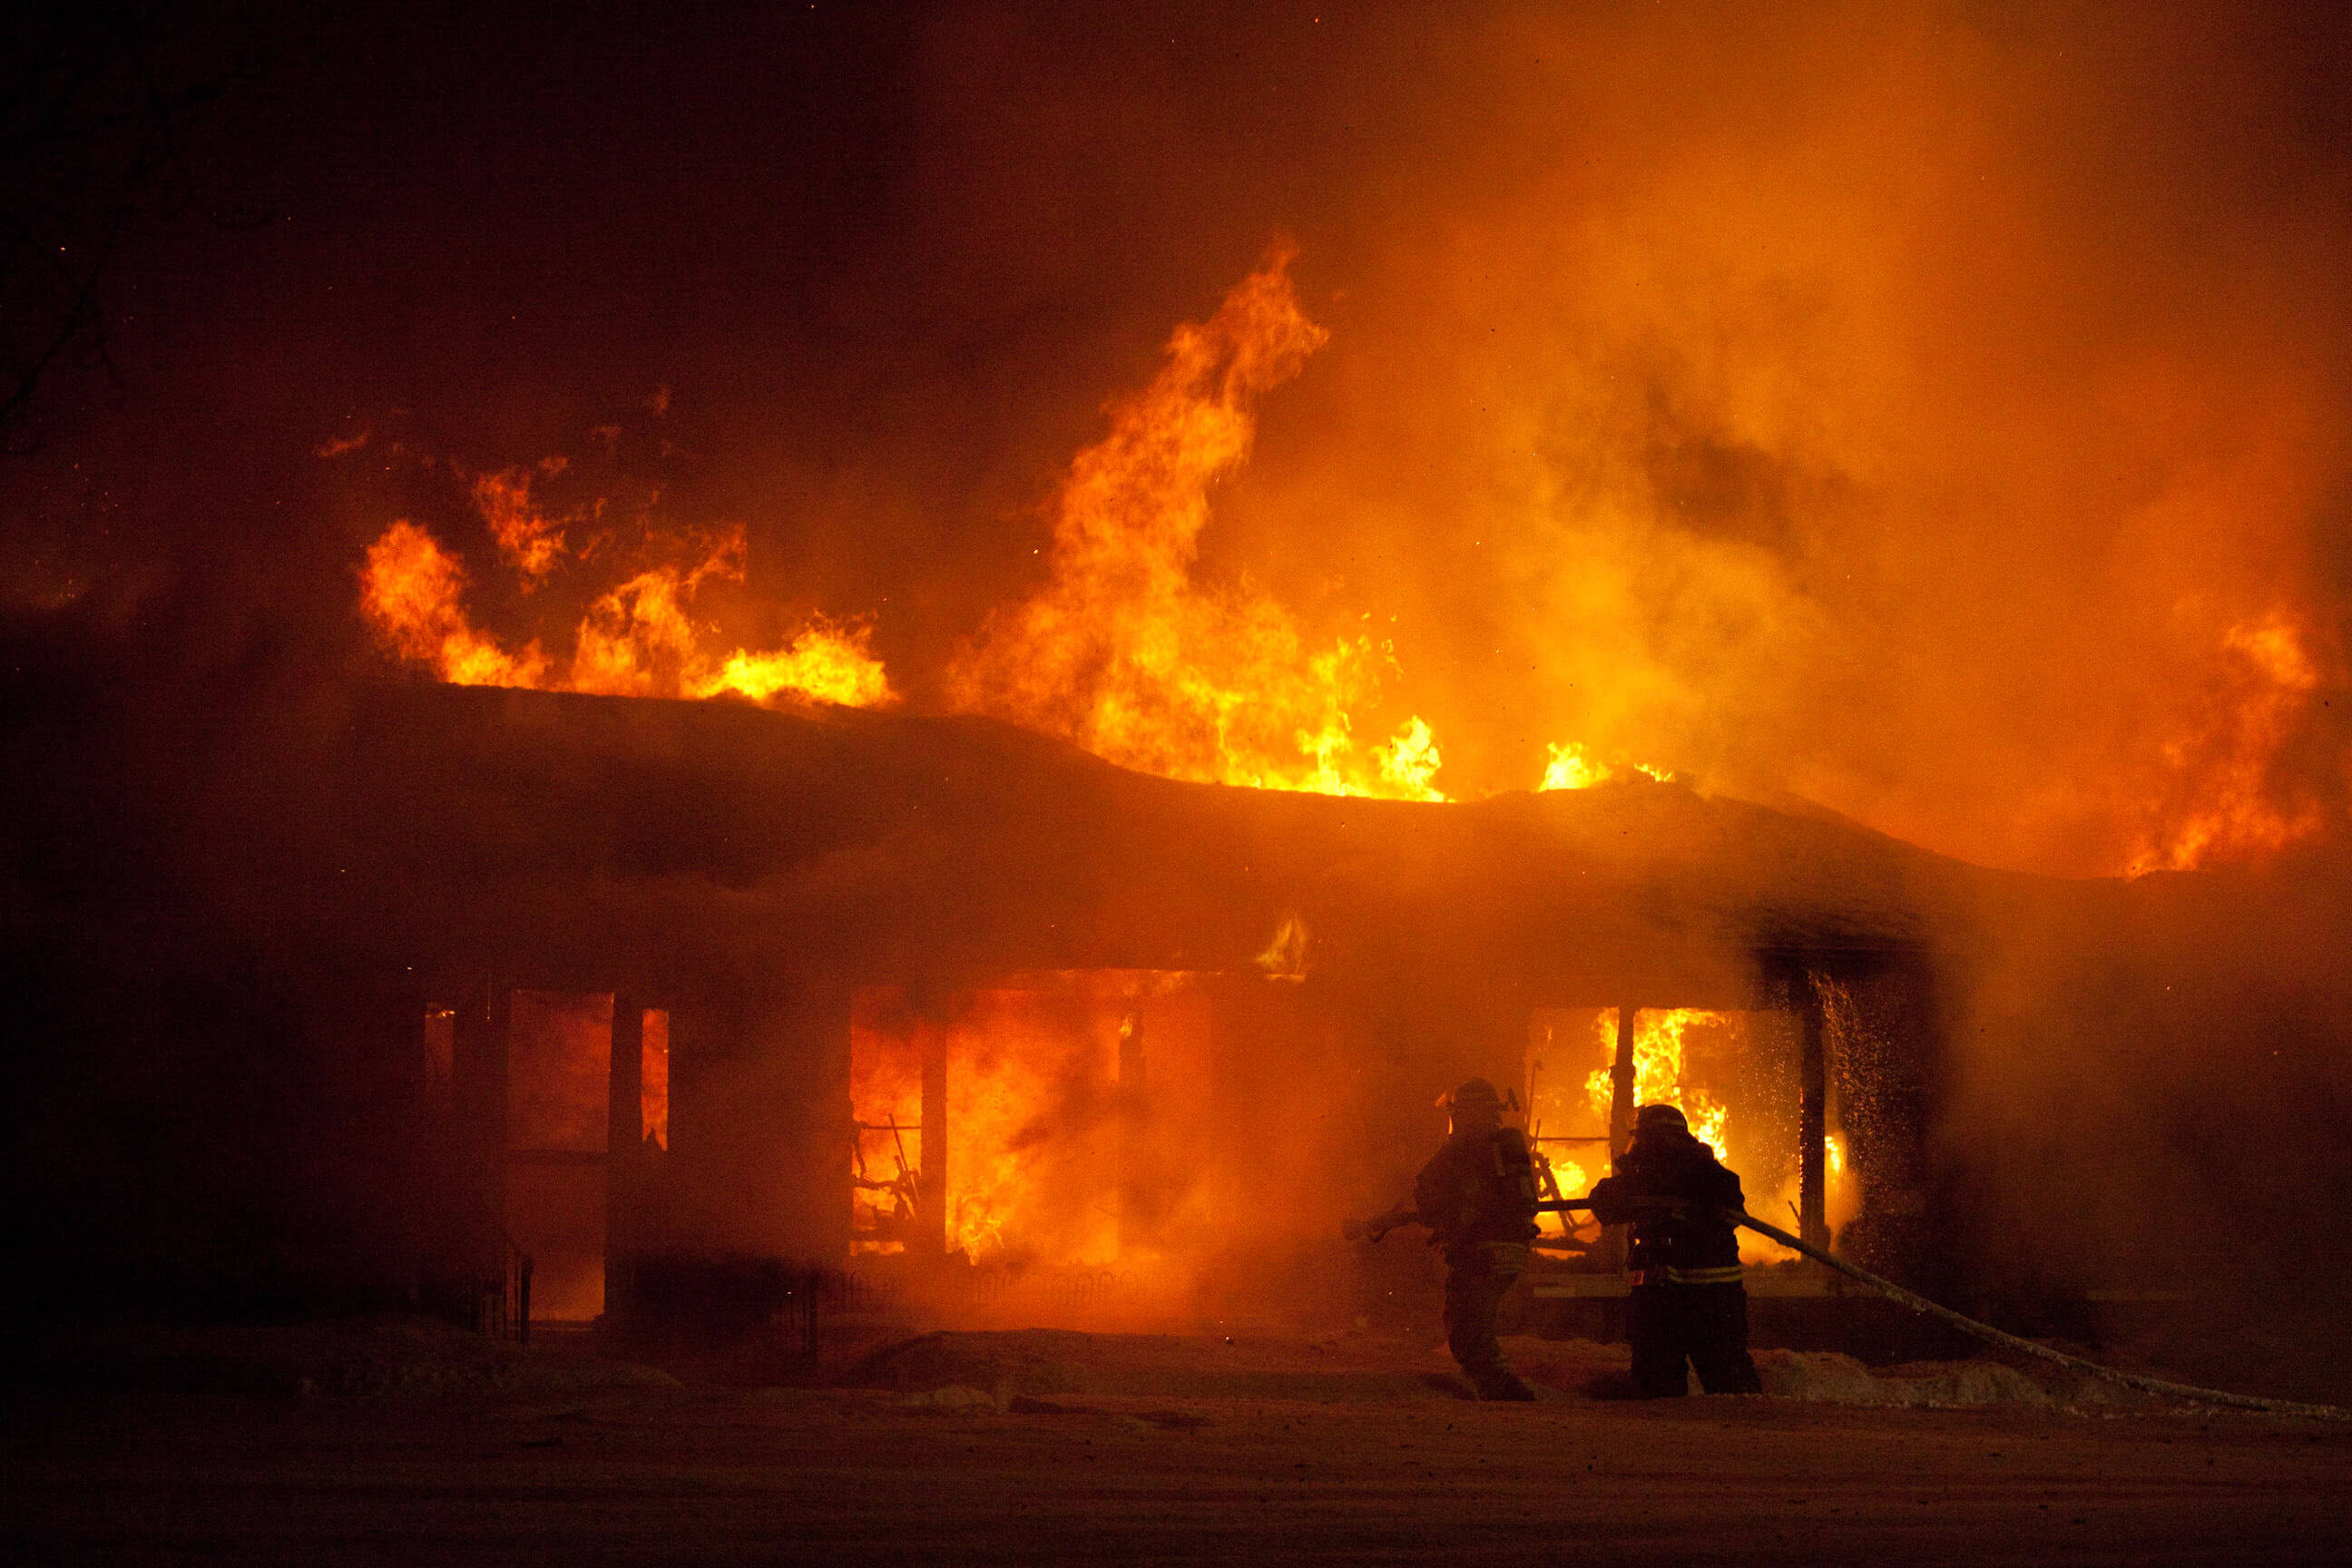 Firefighters drag a hose to tackle a giant house fire in Ladysmith Wisconsin